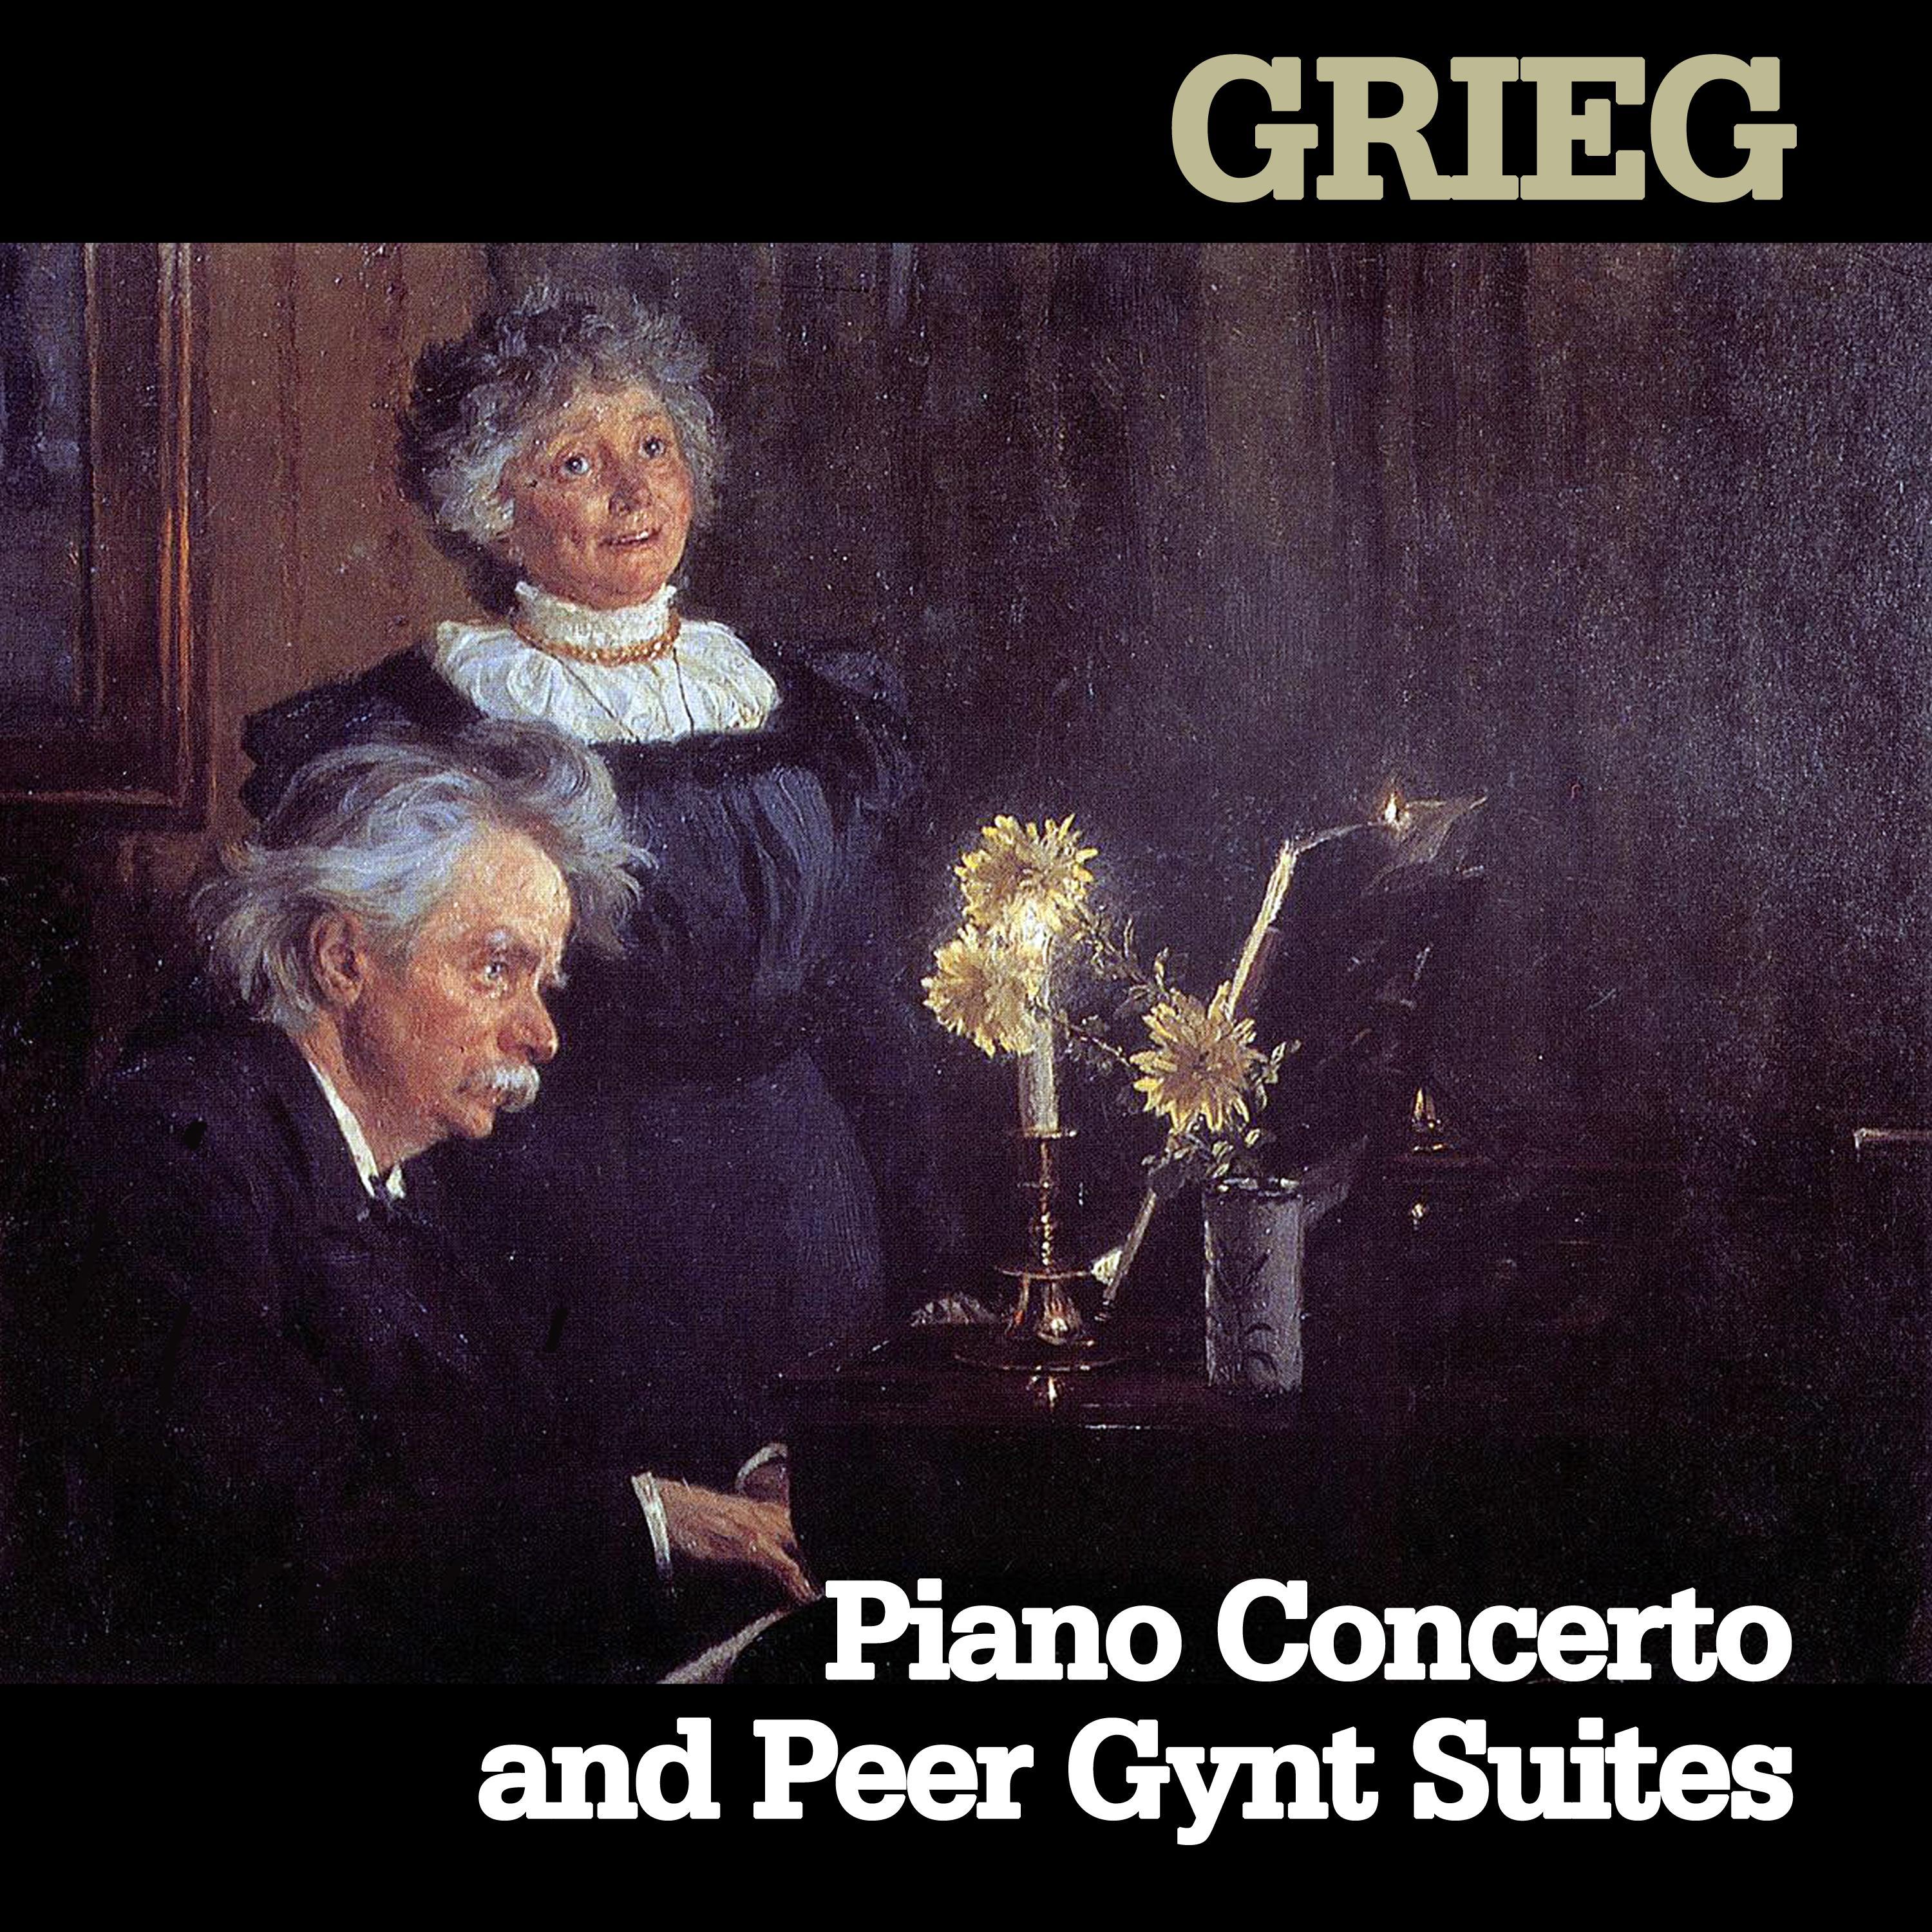 Grieg: Piano Concerto and Peer Gynt Suites